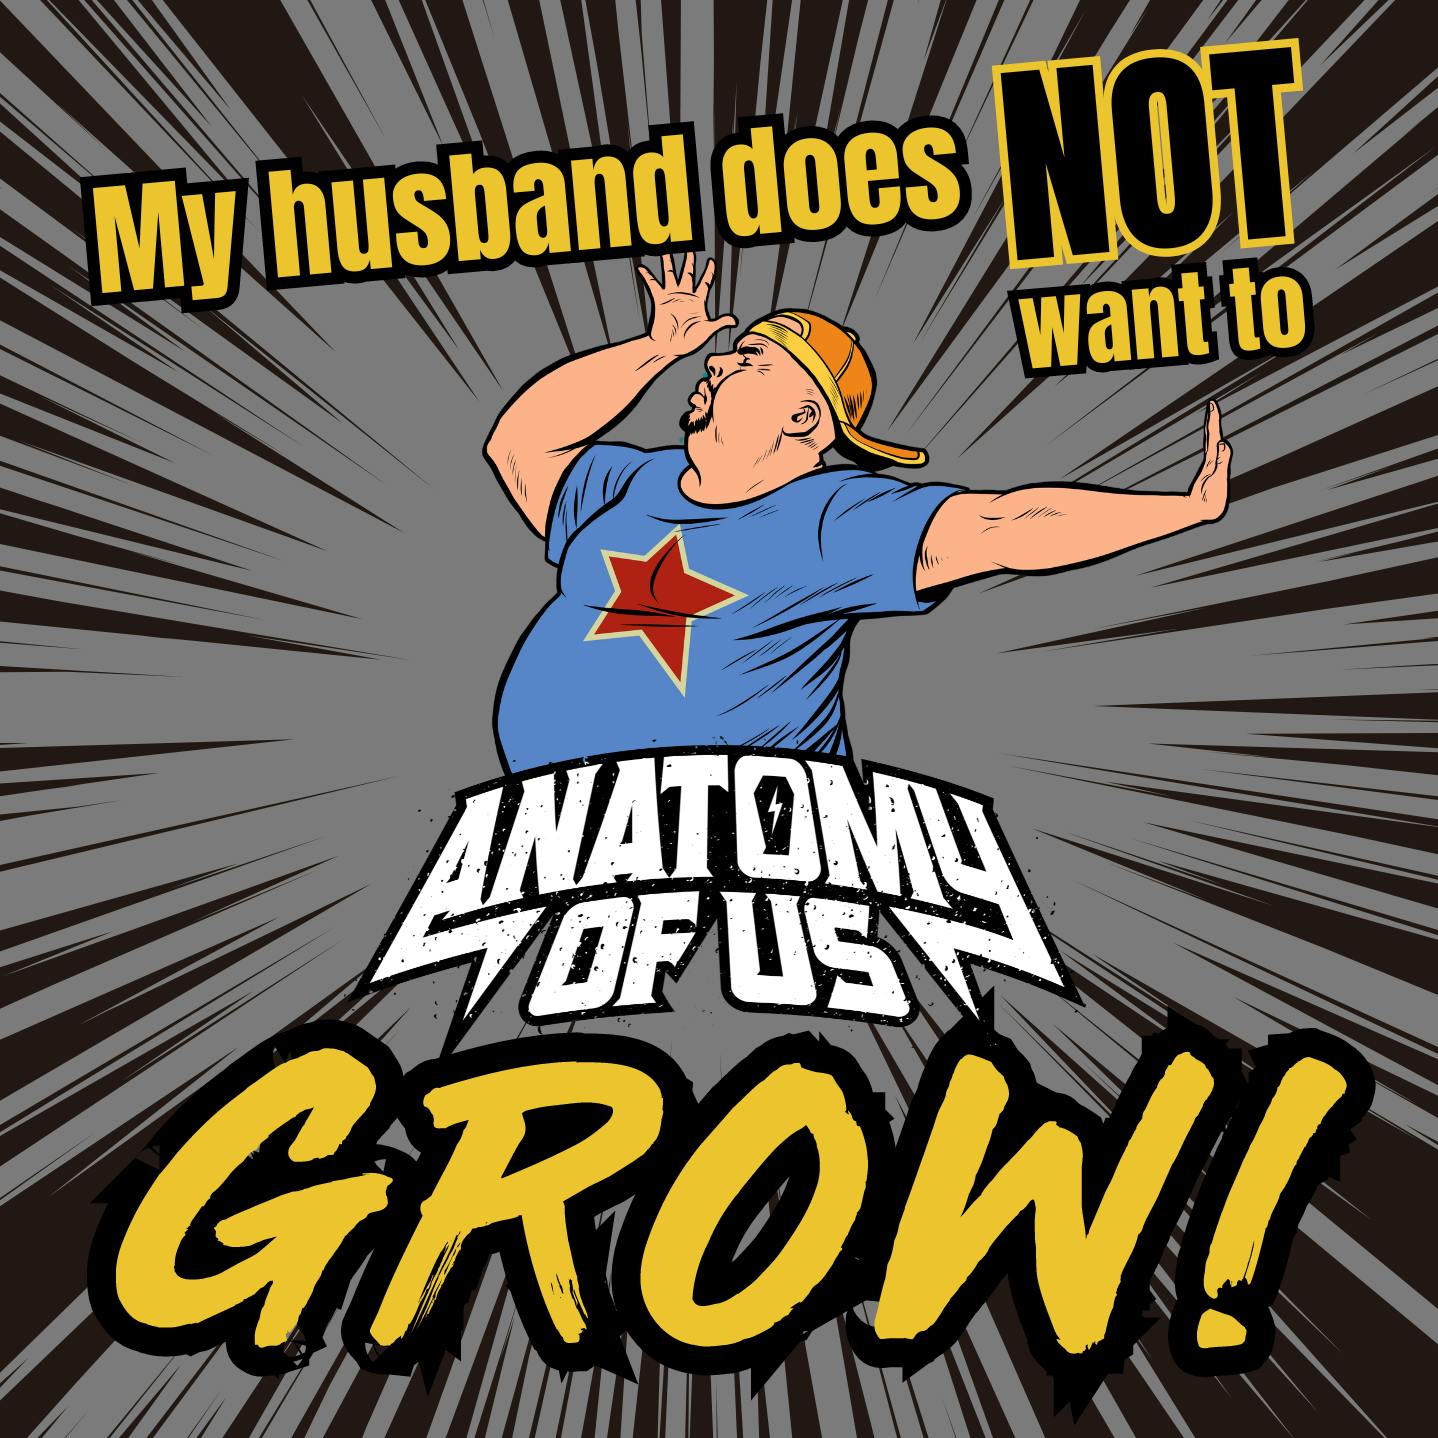 My Husband does NOT want to GROW!